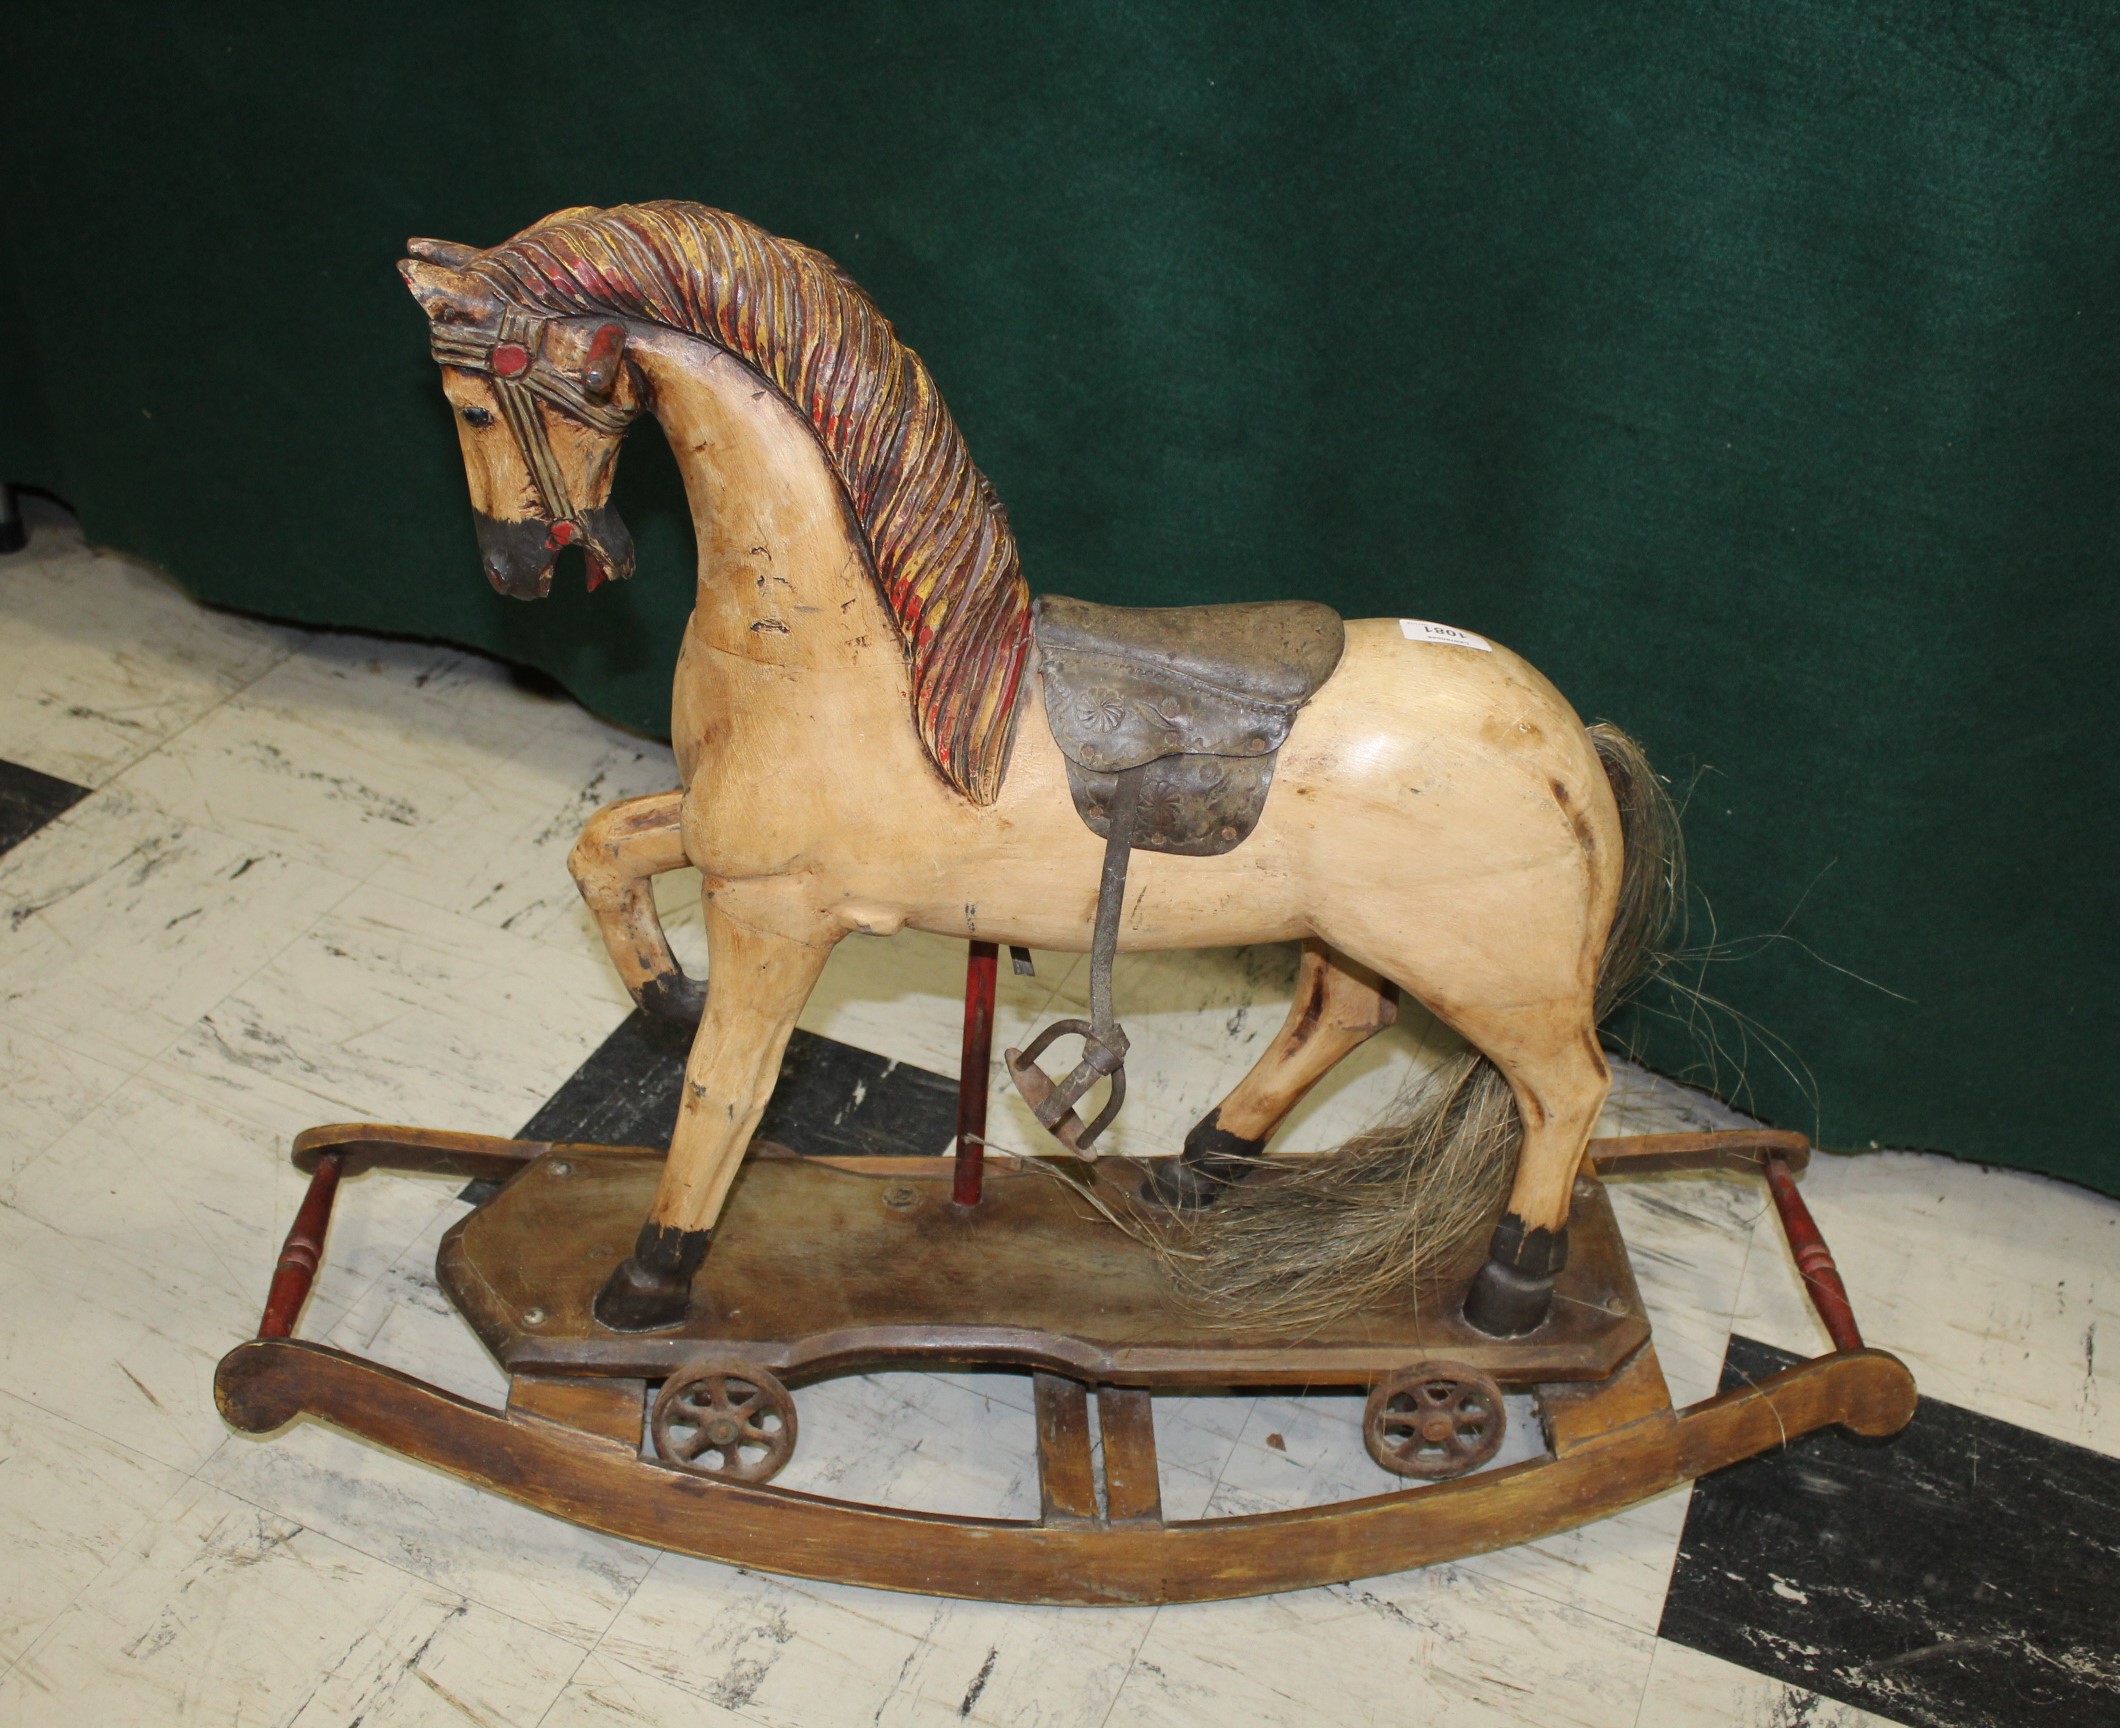 ANTIQUE ROCKING HORSE - FOLK ART INTEREST a small carved and painted wooden rocking horse, with